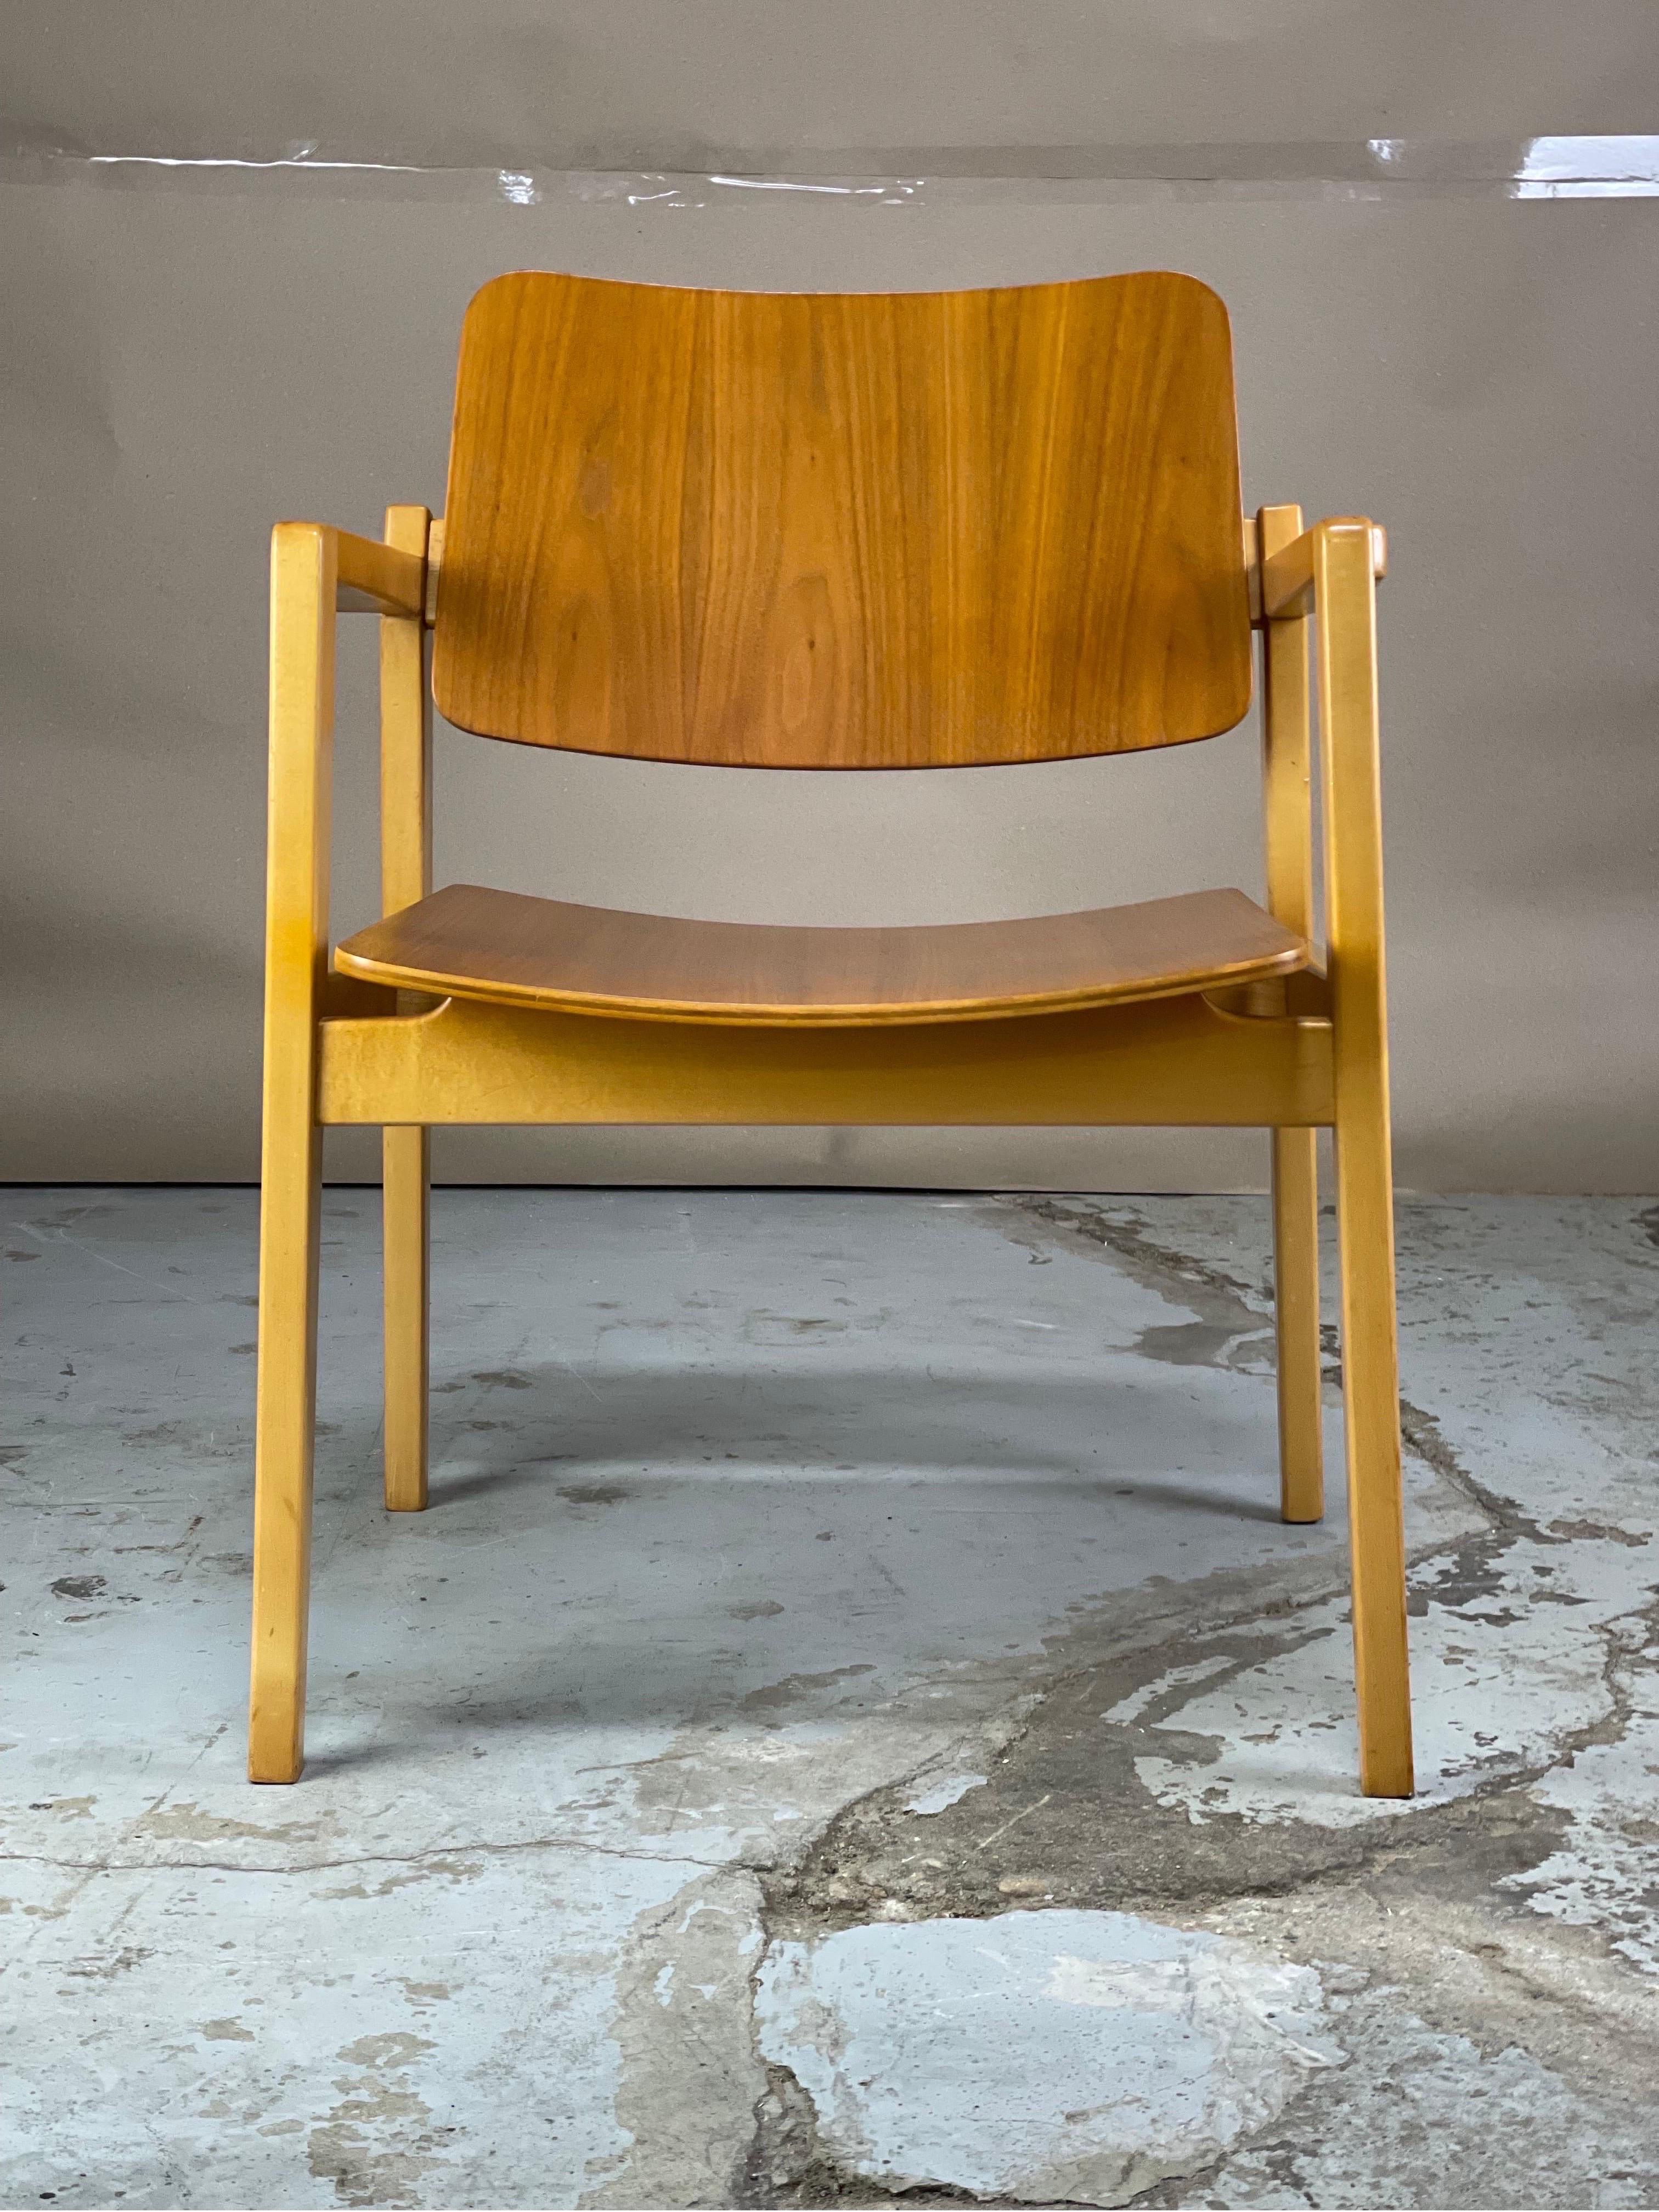 American Mid Century Chair in Beech and Bent Walnut Ply by Jens Risom 1952 For Sale